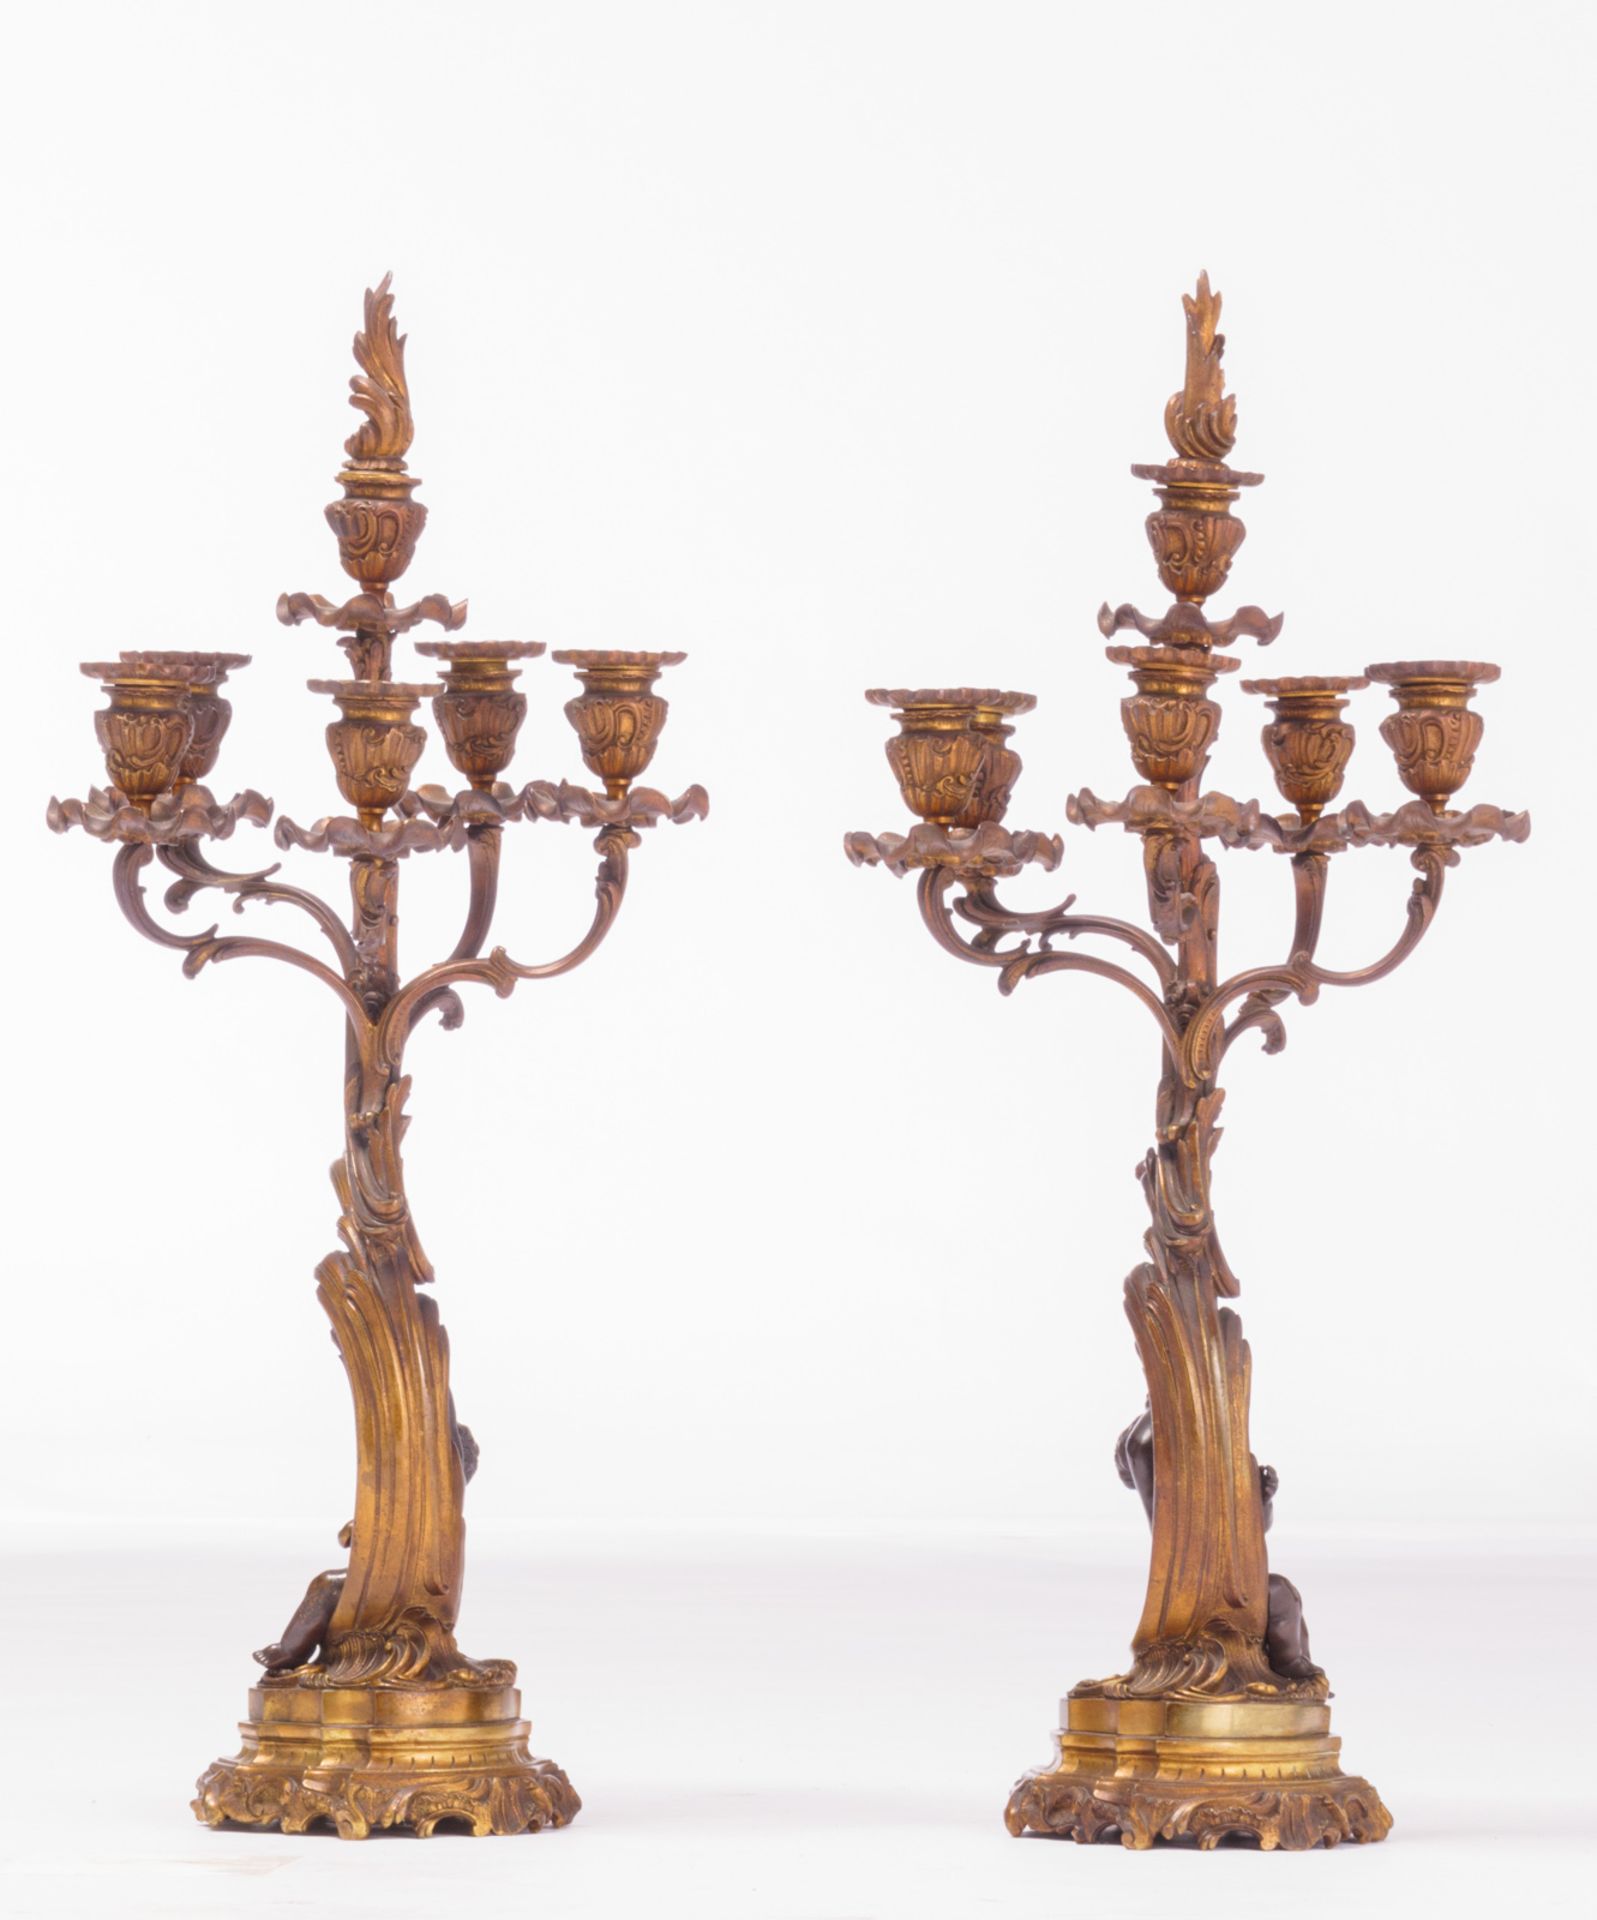 A second half of the 19thC pair of Rococo revival patinated bronze candlesticks, H 66 cm - Bild 2 aus 6